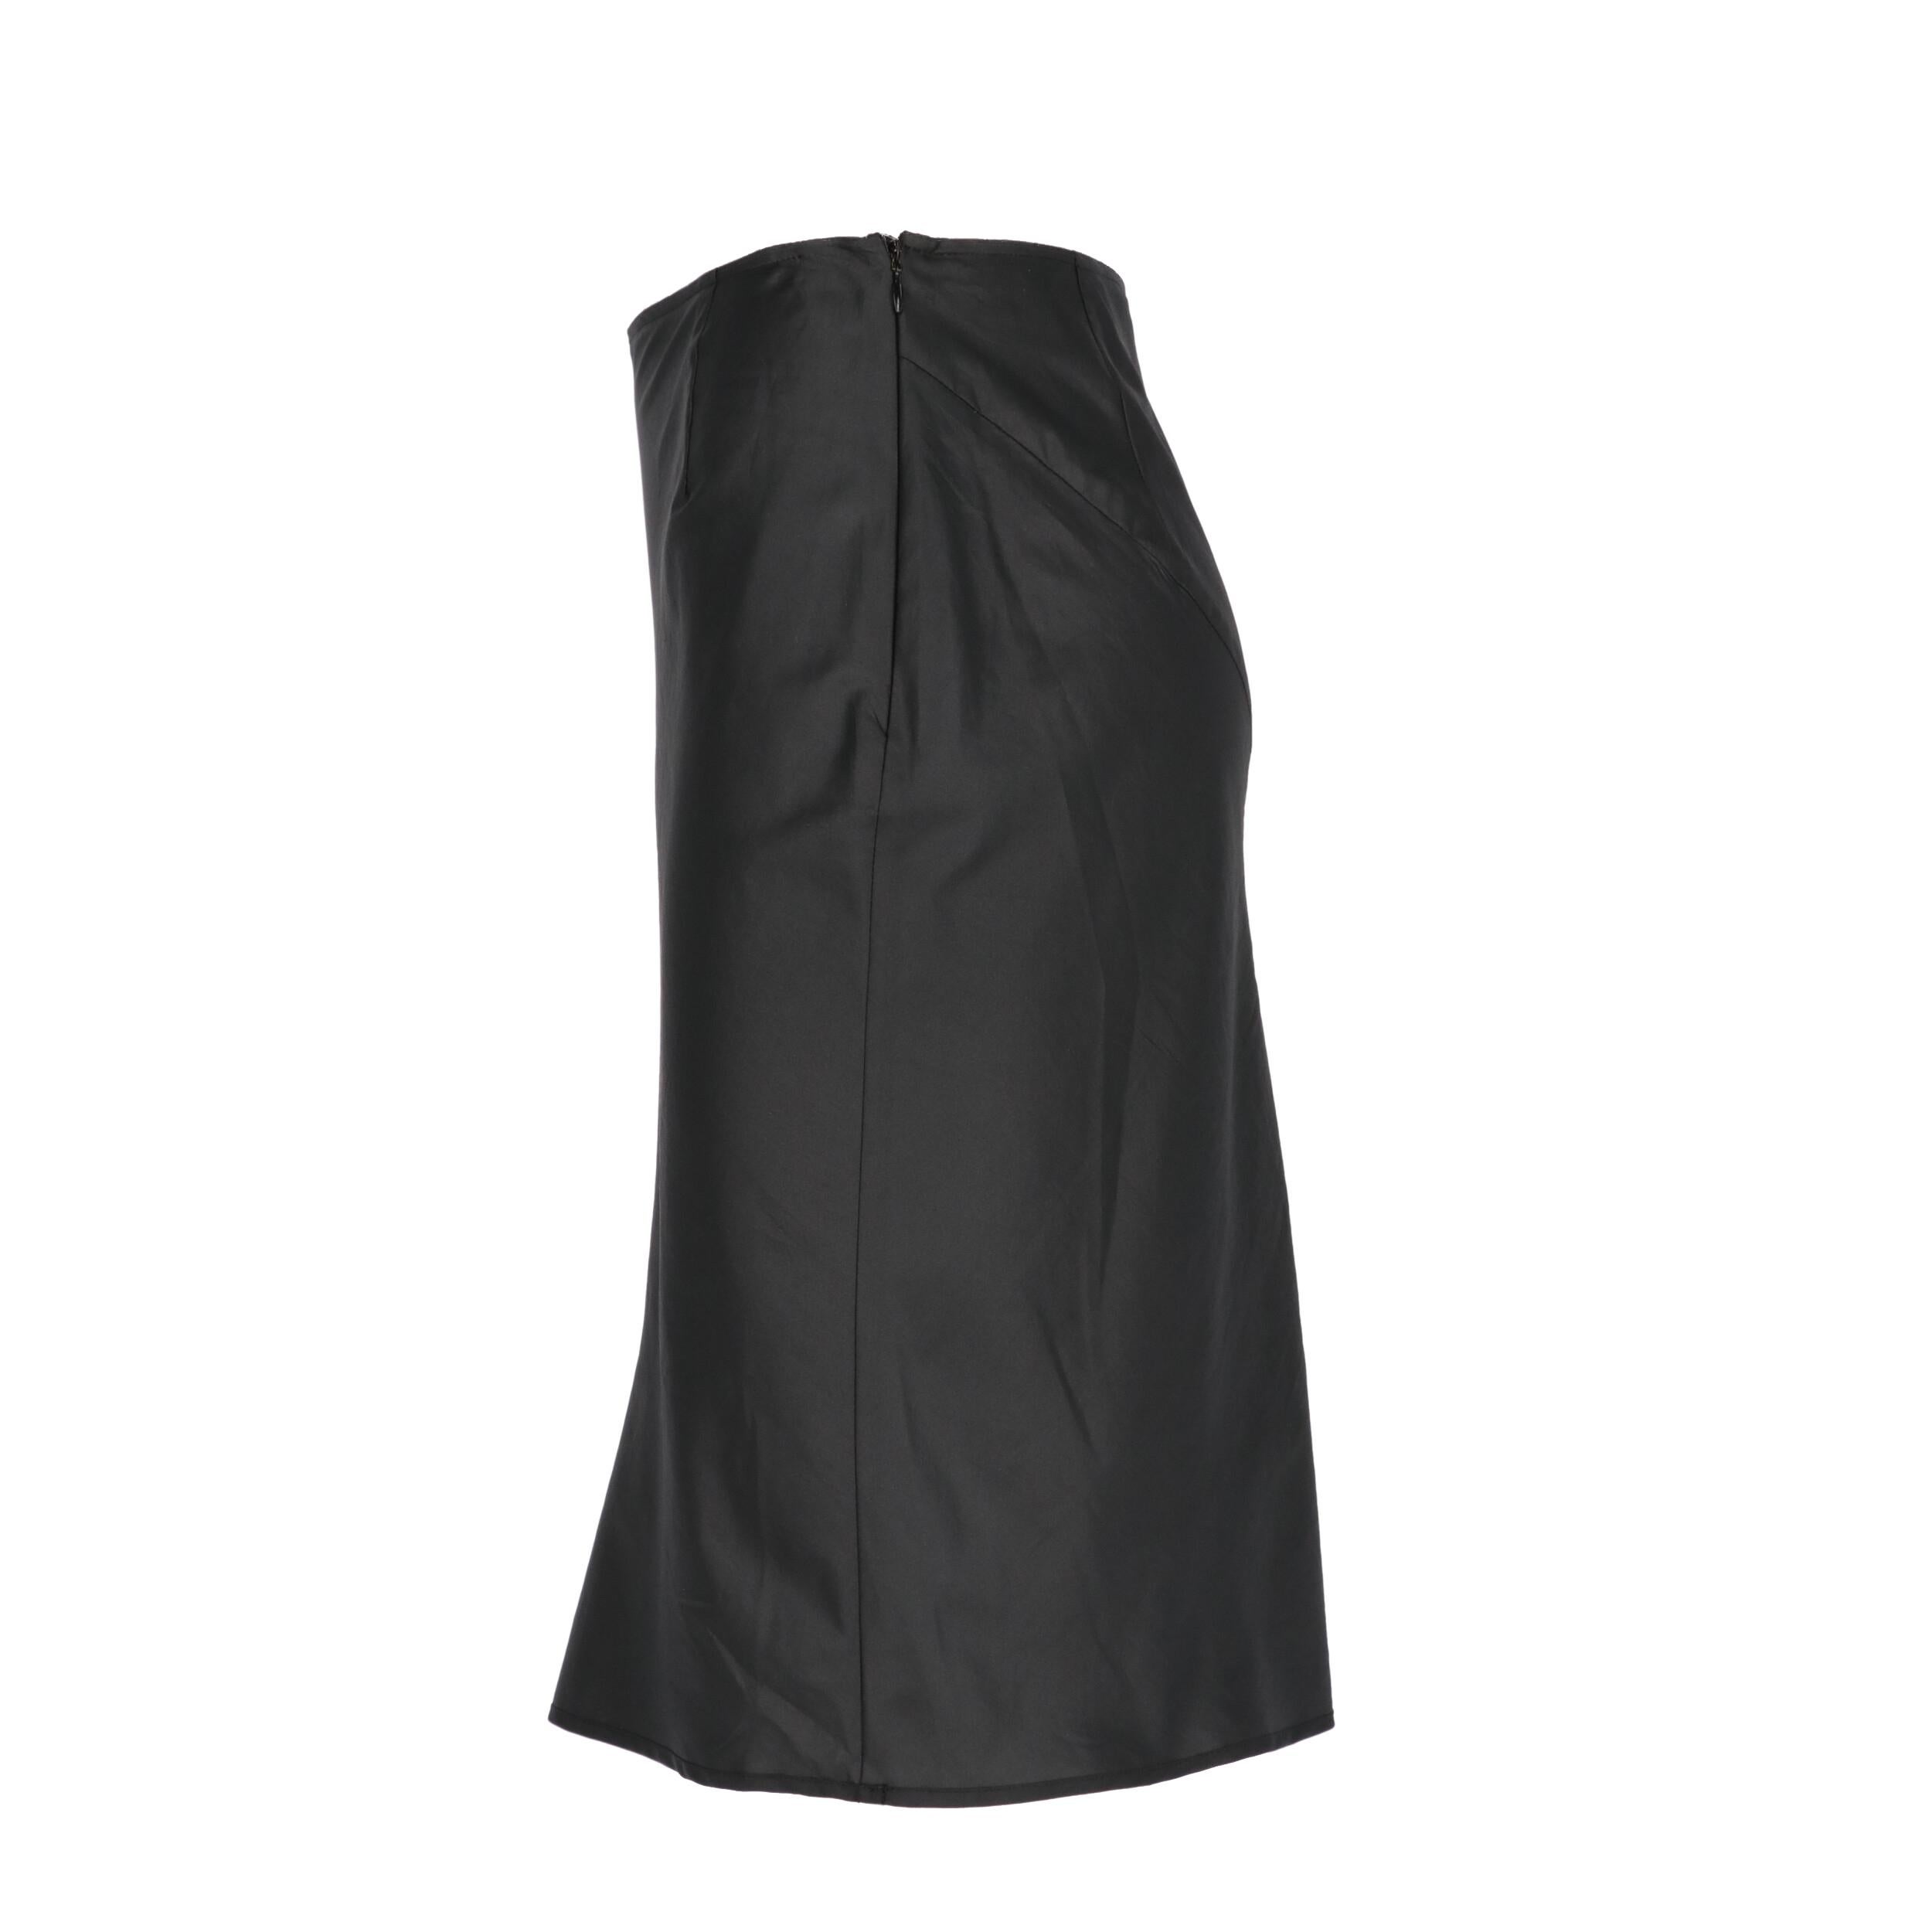 Helmut Lang skirt in black polyester and side closure with zip and hook.
Years: 2000s

Size: 40 IT

Flat measurements

Height: 54 cm
Waist: 34 cm 